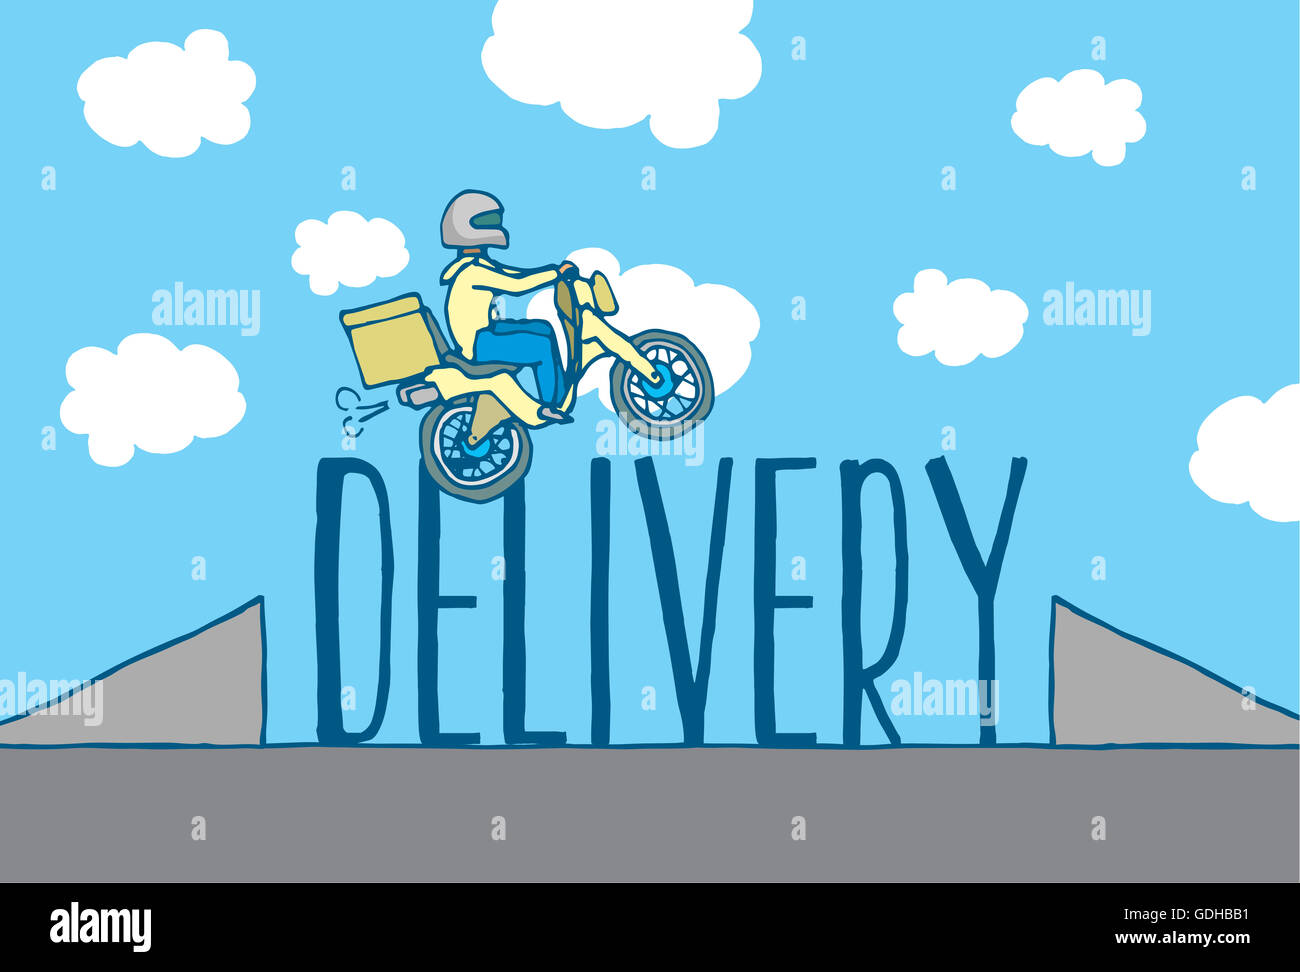 Cartoon illustration of reckless delivery boy jumping ramp on motorcycle Stock Photo